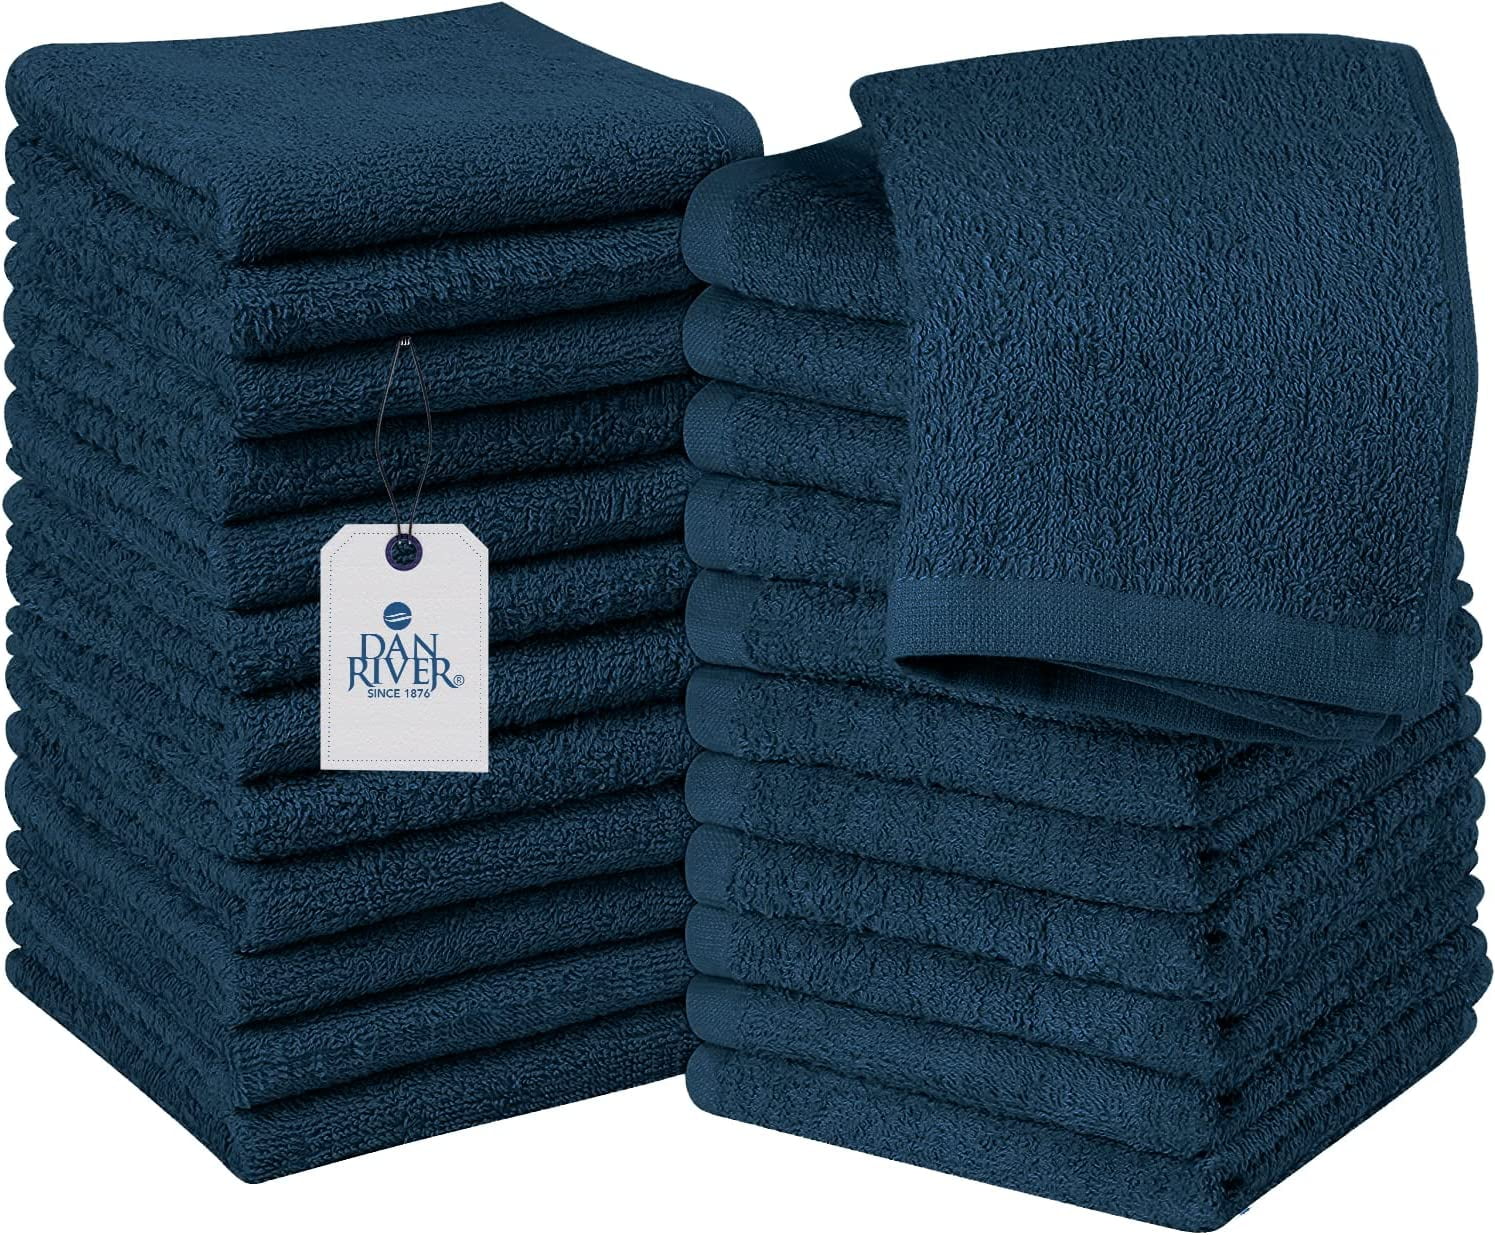 Pack of 12 Washcloth Set 13x13 Inches 100% Cotton Washcloths for Bathroom &  Kitchen, Premium Hotel, Spa & Saloon Towel, Highly Absorbent Wash Rags for